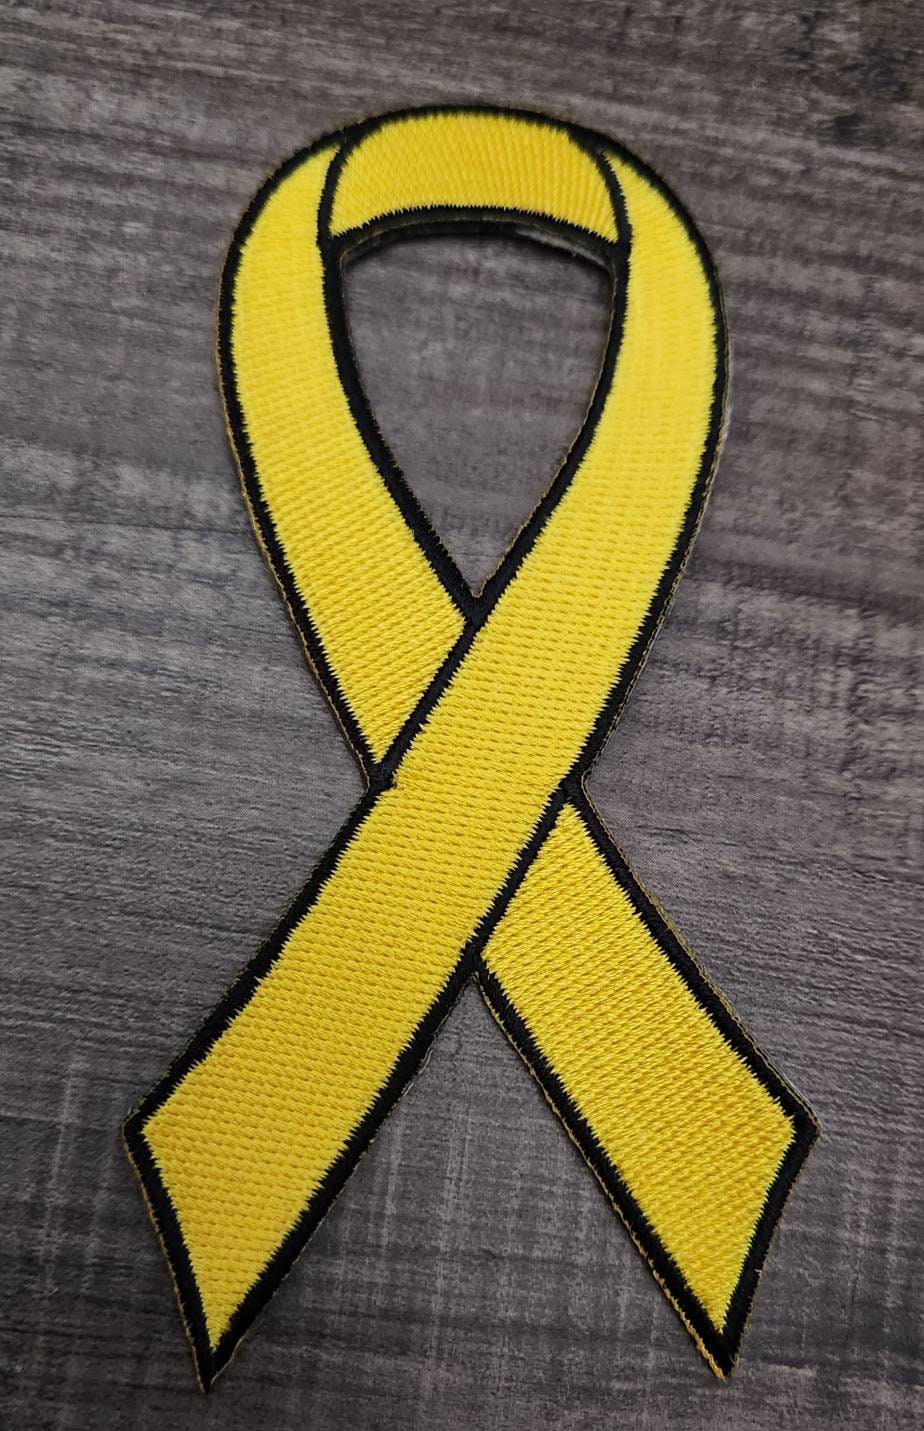 Childhood Cancer "Yellow" Ribbon Patch, Size 5" Embroidered (1 pc) Iron or Sew-on, Cancer  Patch/Applique, Patches for Causes